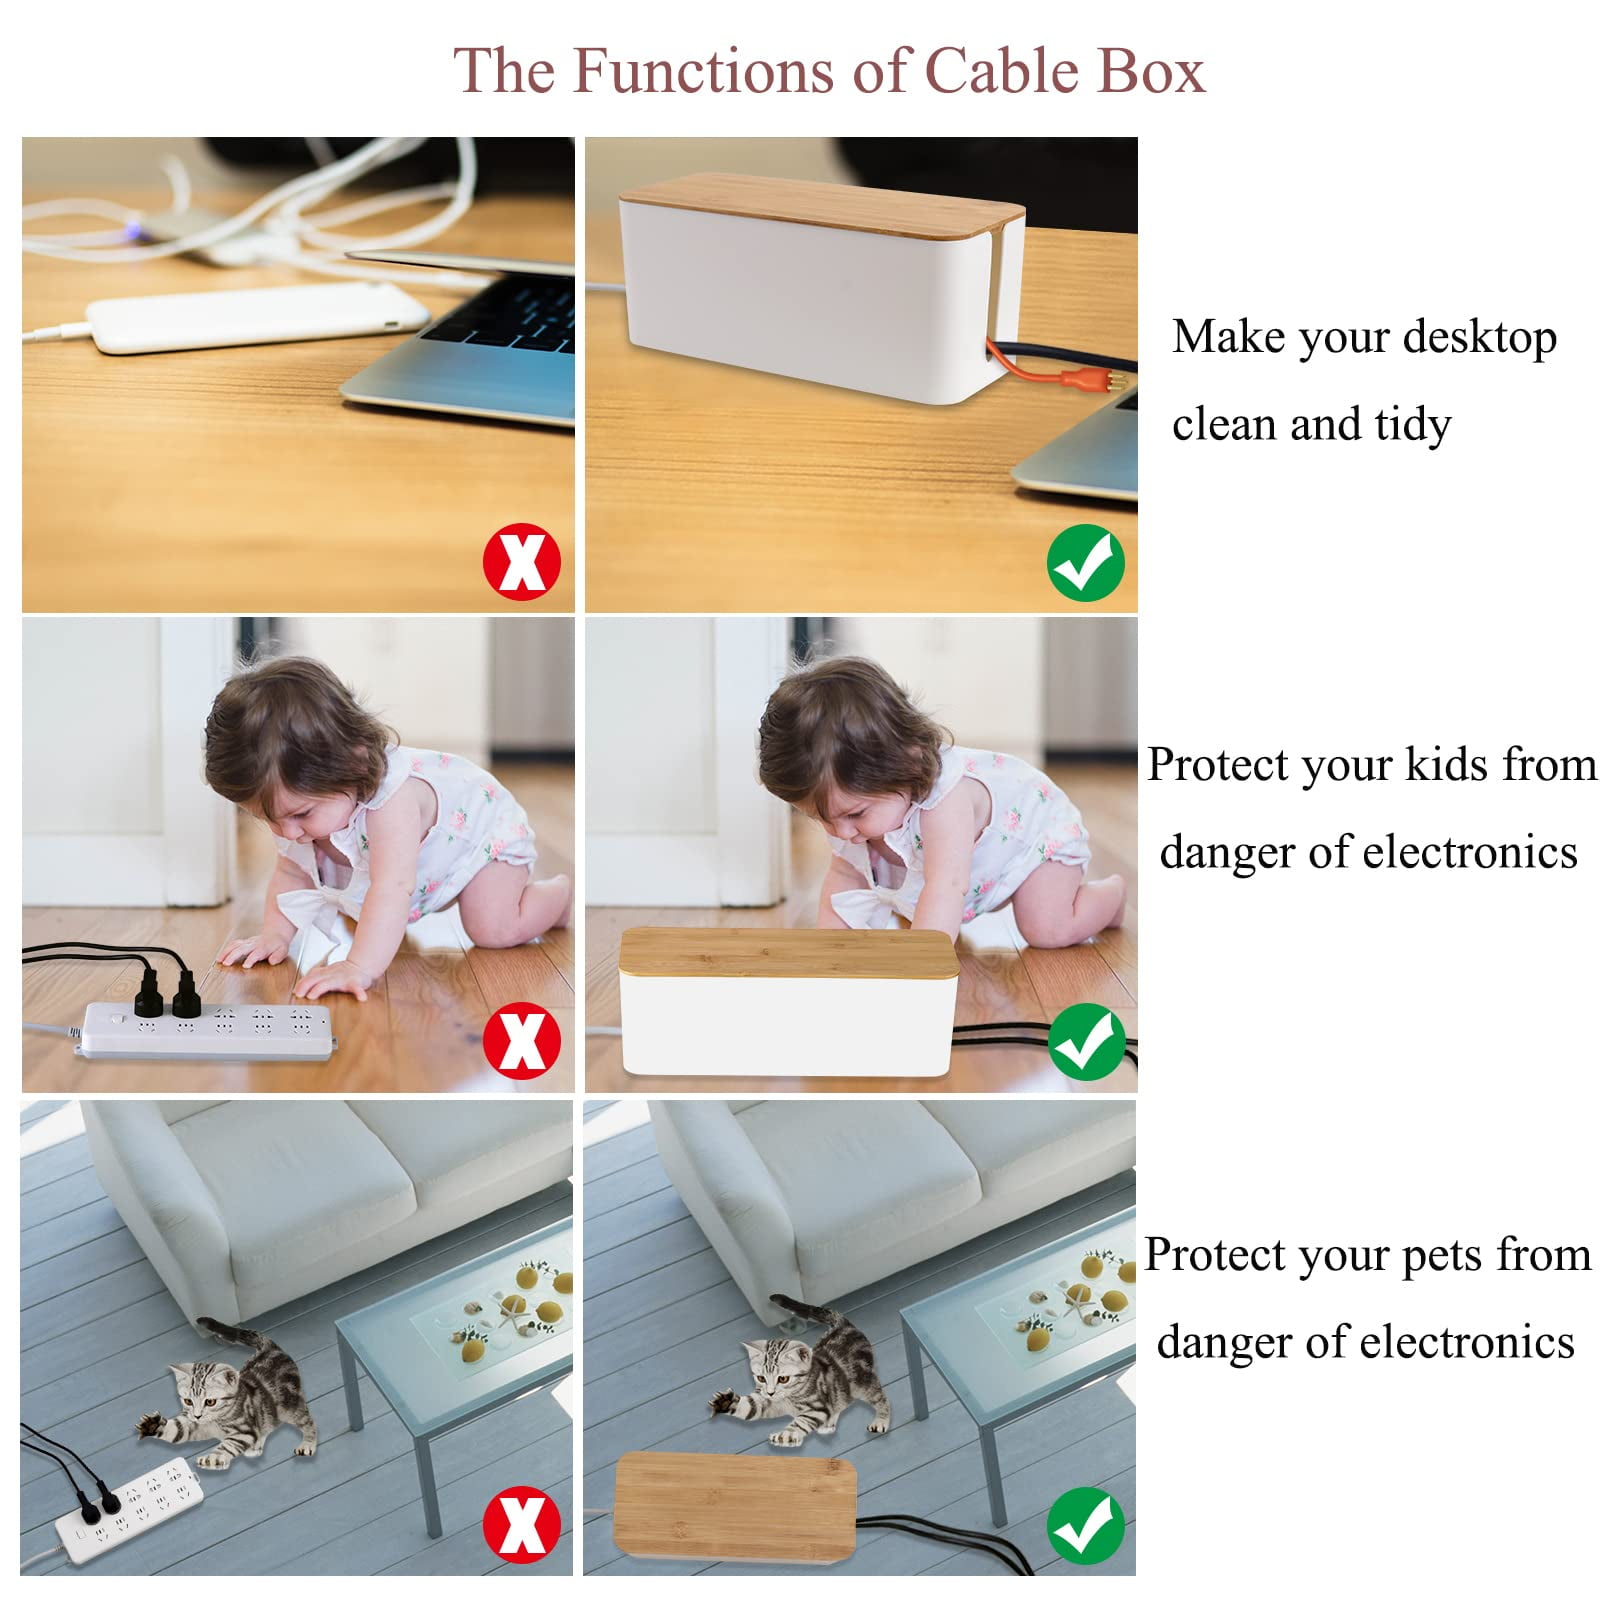 YECAYE 2 Pack Cable Management Box,Large & Medium Cable Organizer Box for  Safe Home & Office Space, Child & Pet Proof Cord Organizer for Desk,Cover